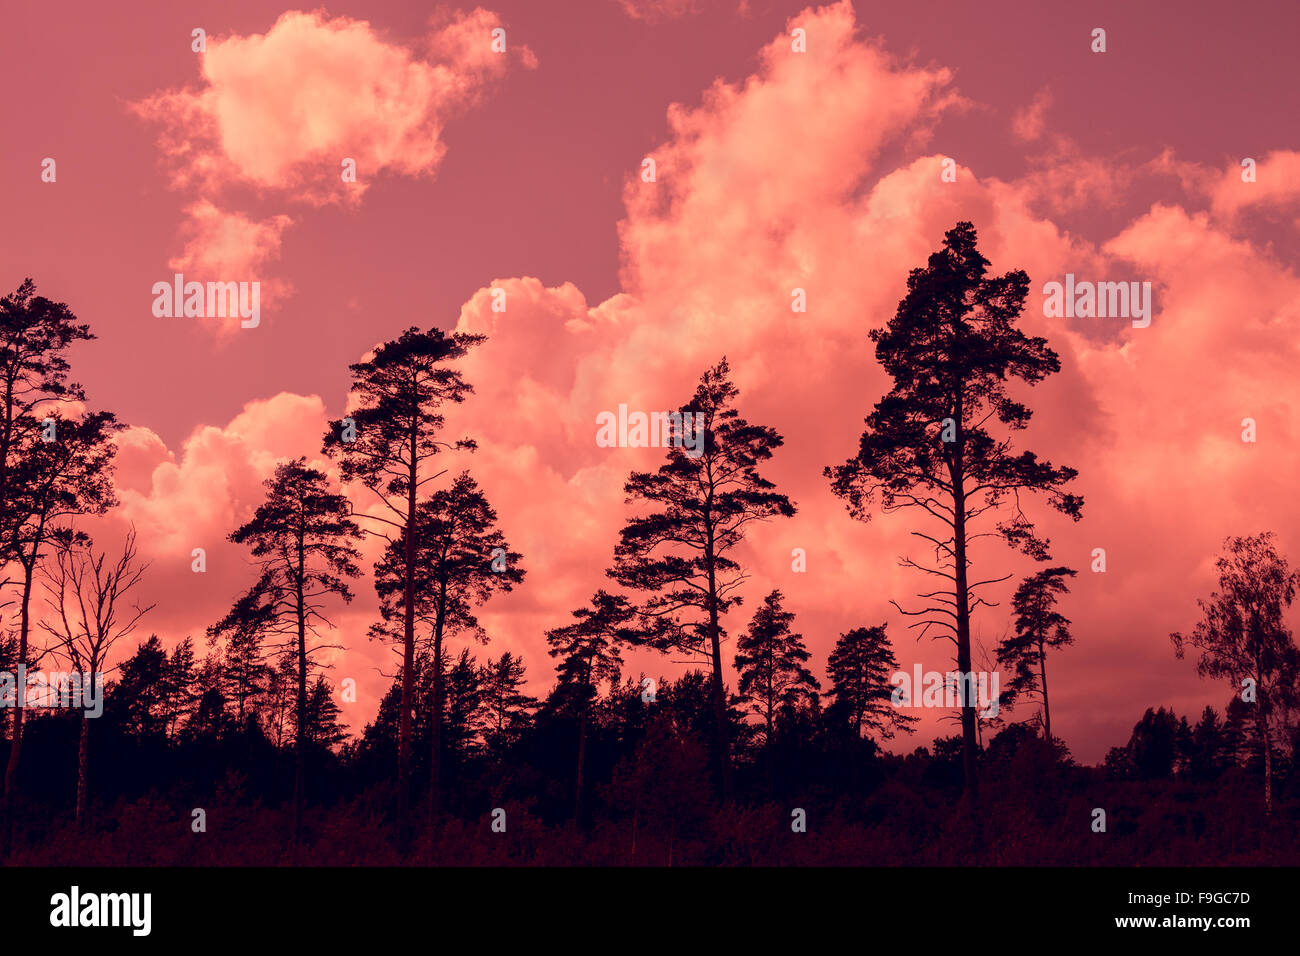 Tall pine trees at sunset cloudy sky Stock Photo